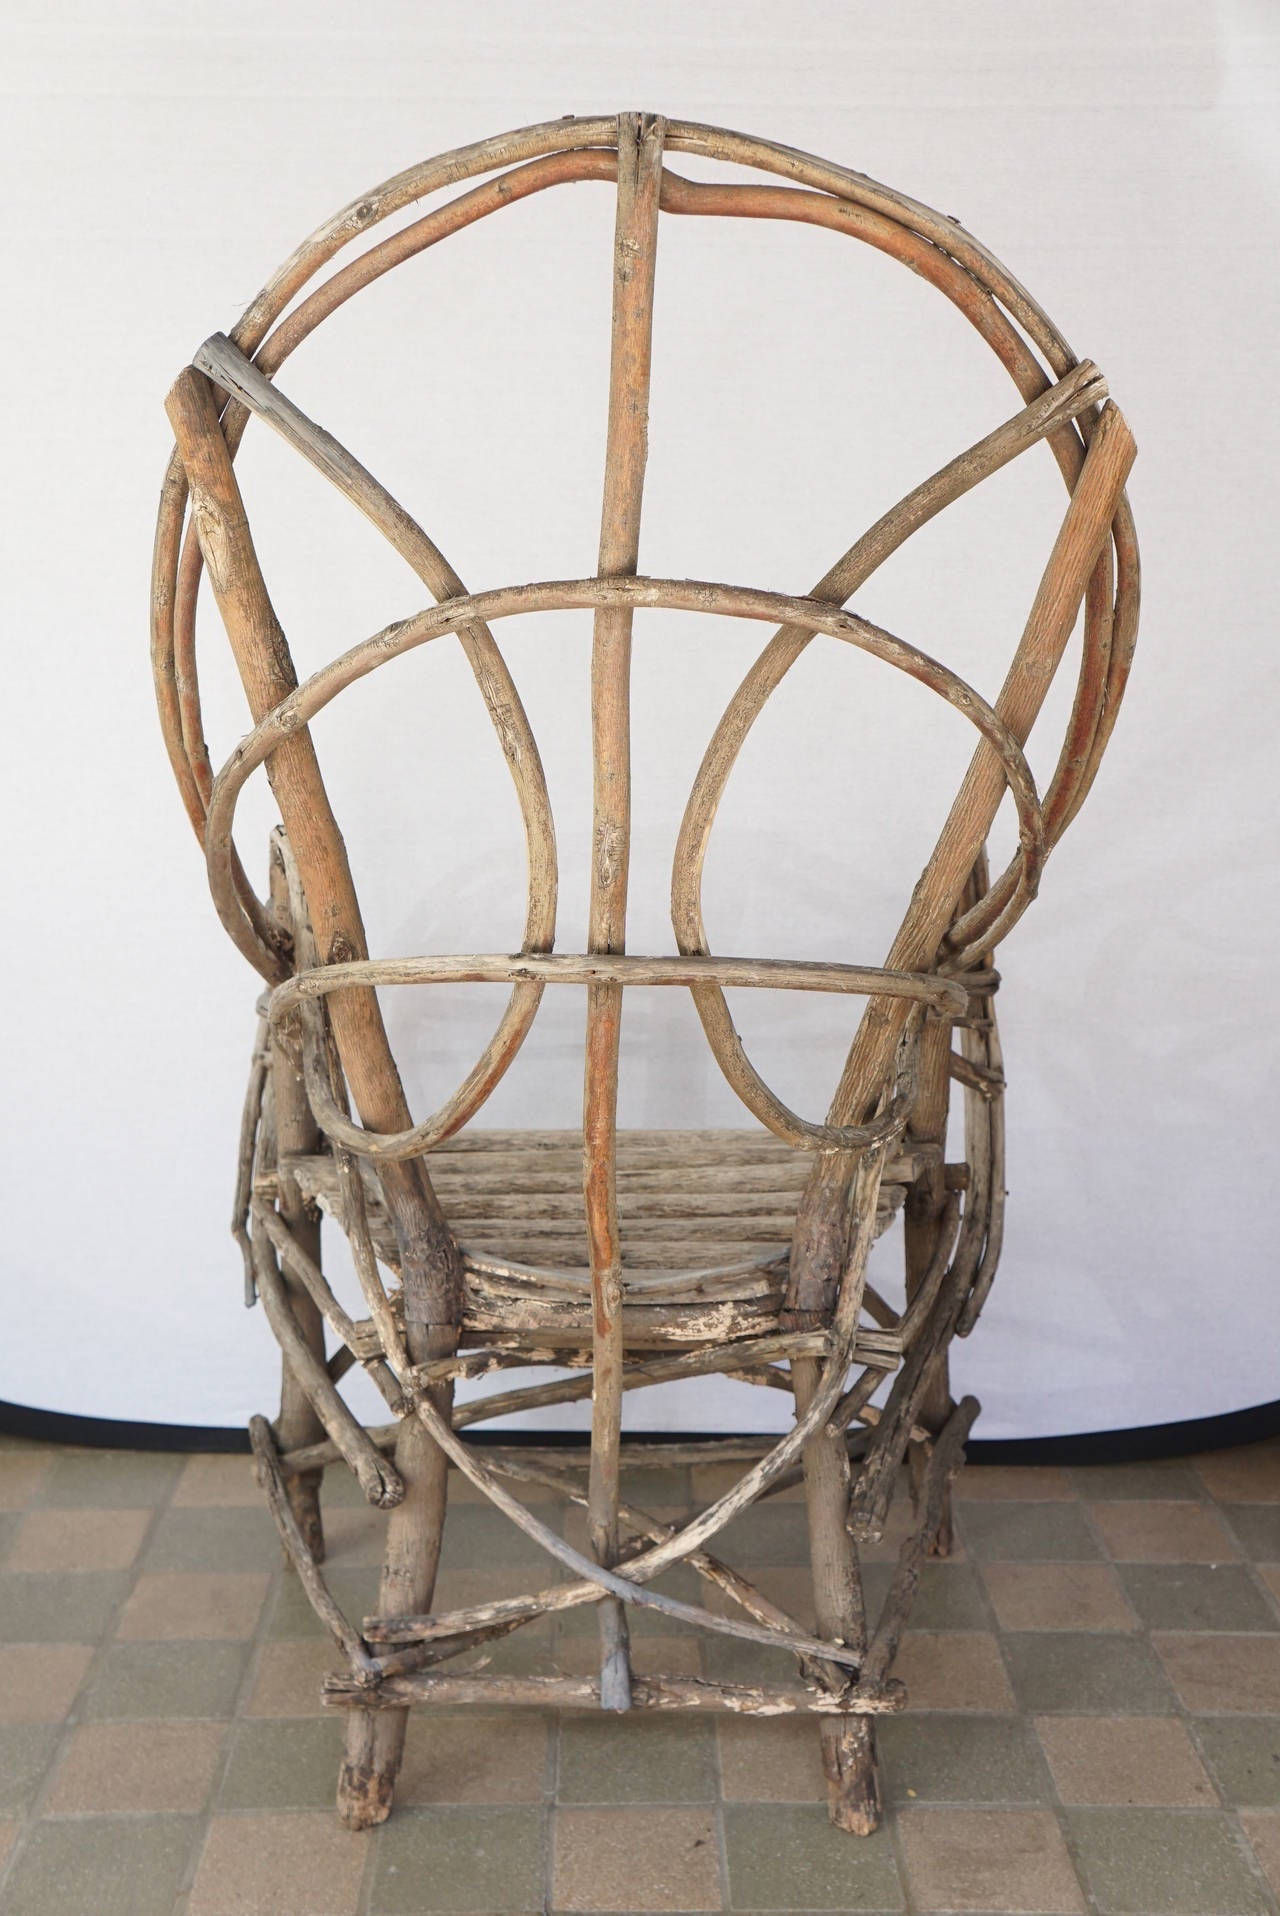 This fine old chair made to grace an Adirondack lodge's deep porch or lawn was made circa 1910.  Made most likely on site at a lodge and found in Upstate New York it is constructed of willow limbs & twigs cut and nailed together. The nails are